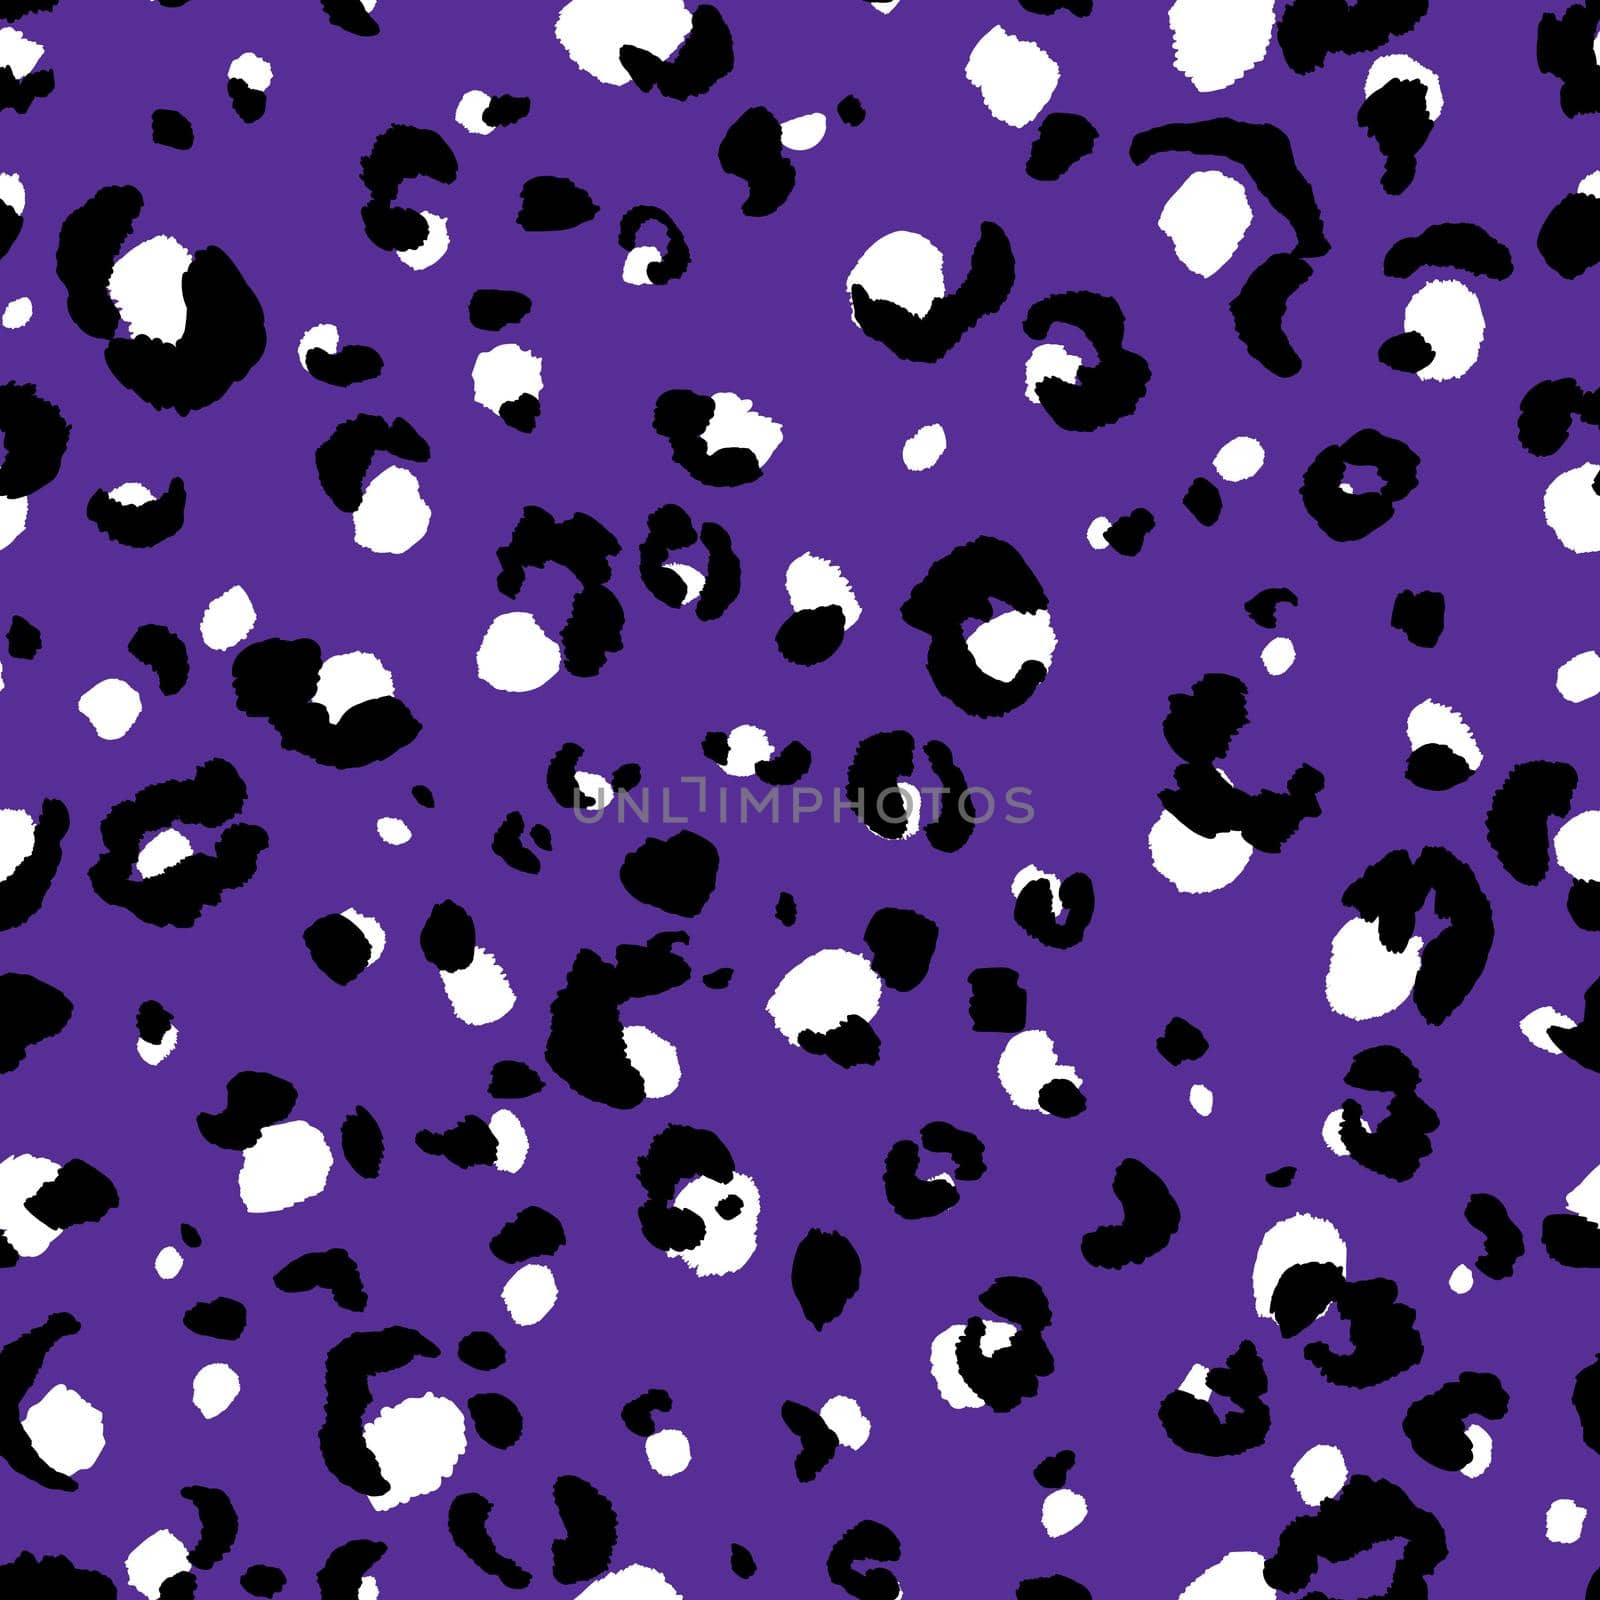 Abstract modern leopard seamless pattern. Animals trendy background. Purple and black decorative vector stock illustration for print, card, postcard, fabric, textile. Modern ornament of stylized skin.